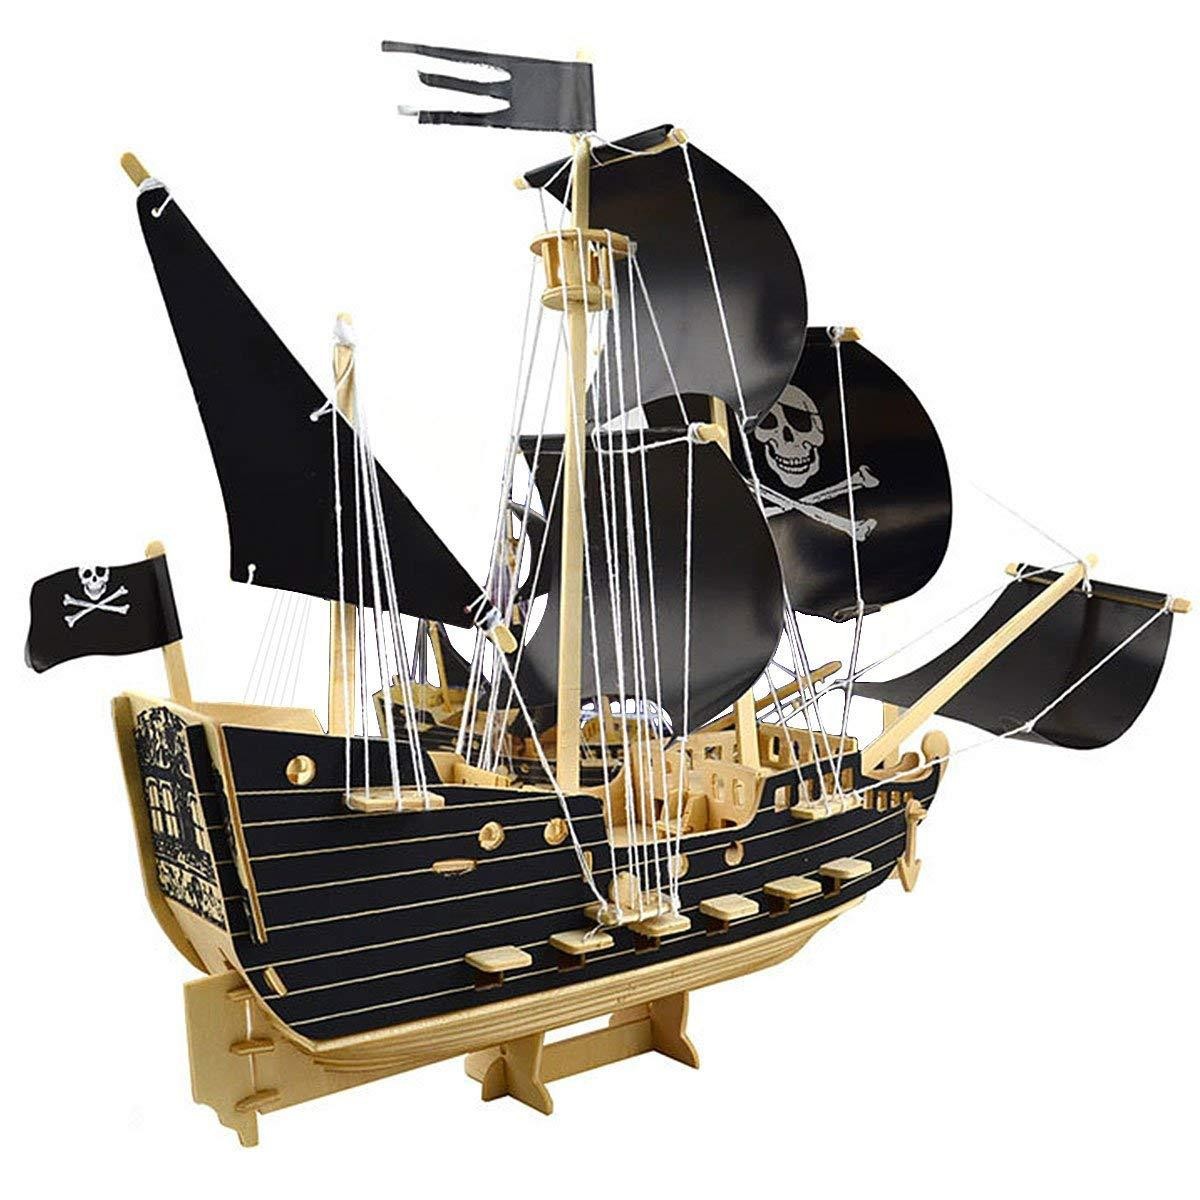 Ship Papercraft Pirate Ship Wooden Models 3d Wooden Sailing Ships Models Puzzle